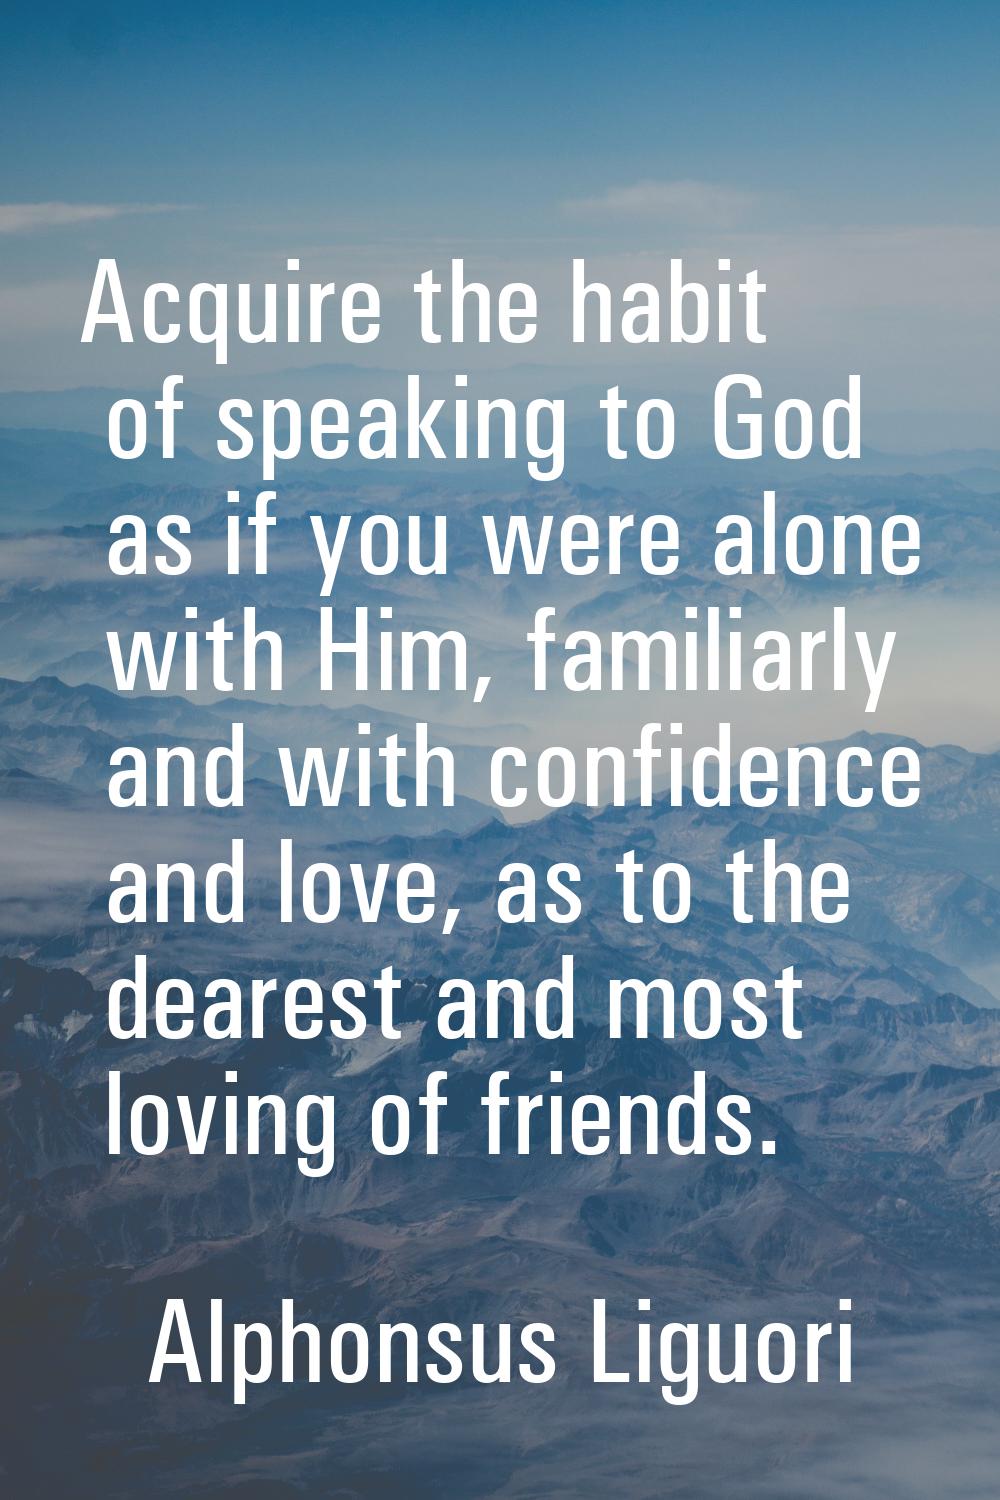 Acquire the habit of speaking to God as if you were alone with Him, familiarly and with confidence 